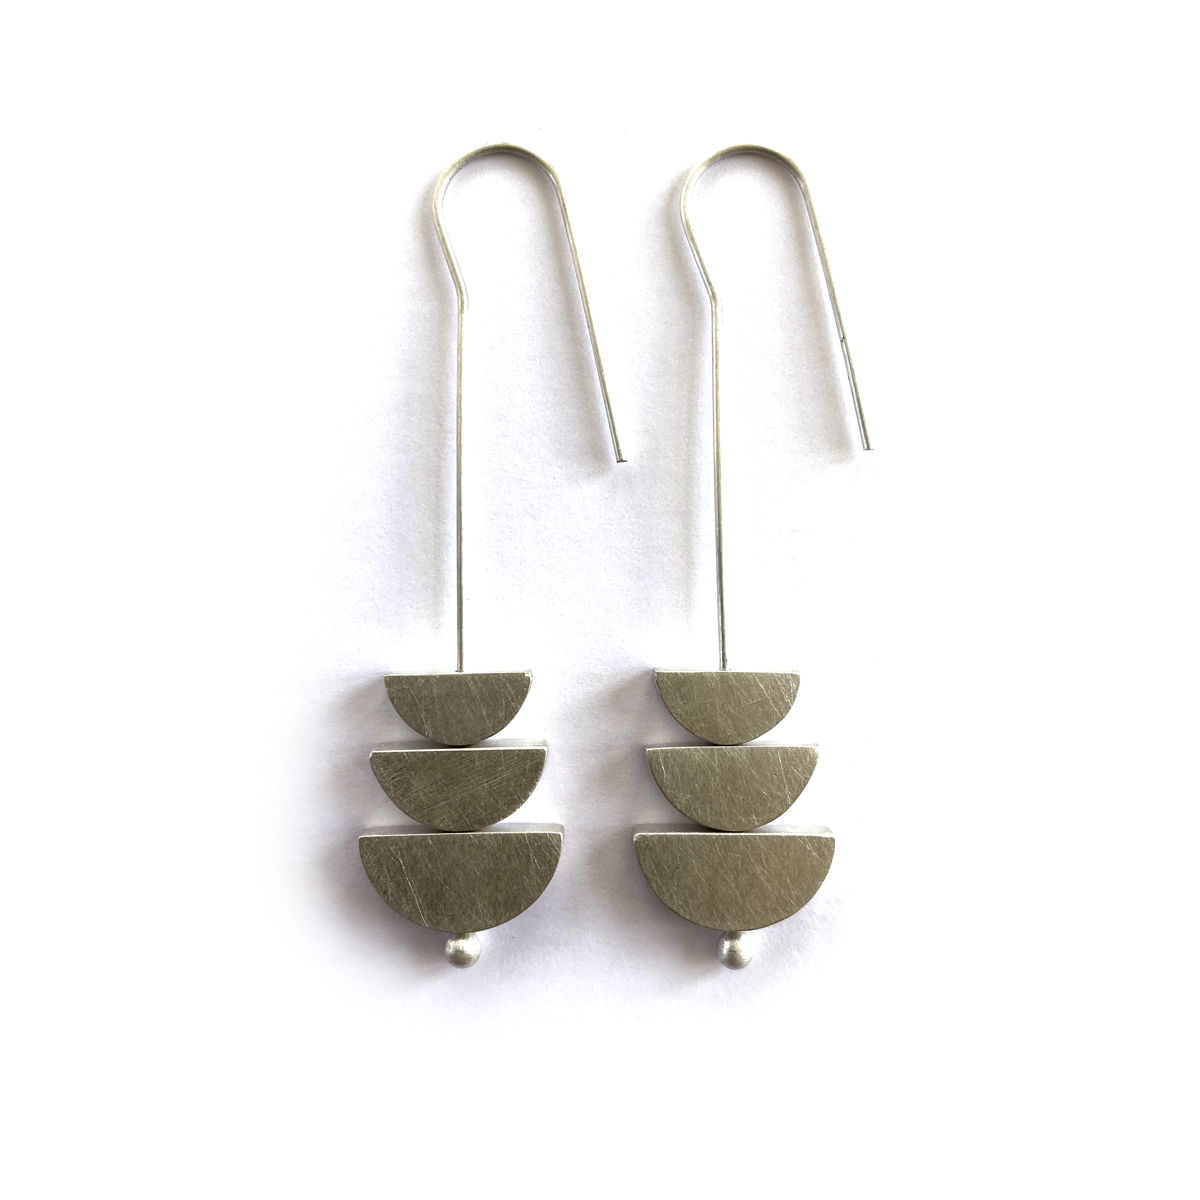 Changing Tides Earrings , silver, 2020, Kate Alterio